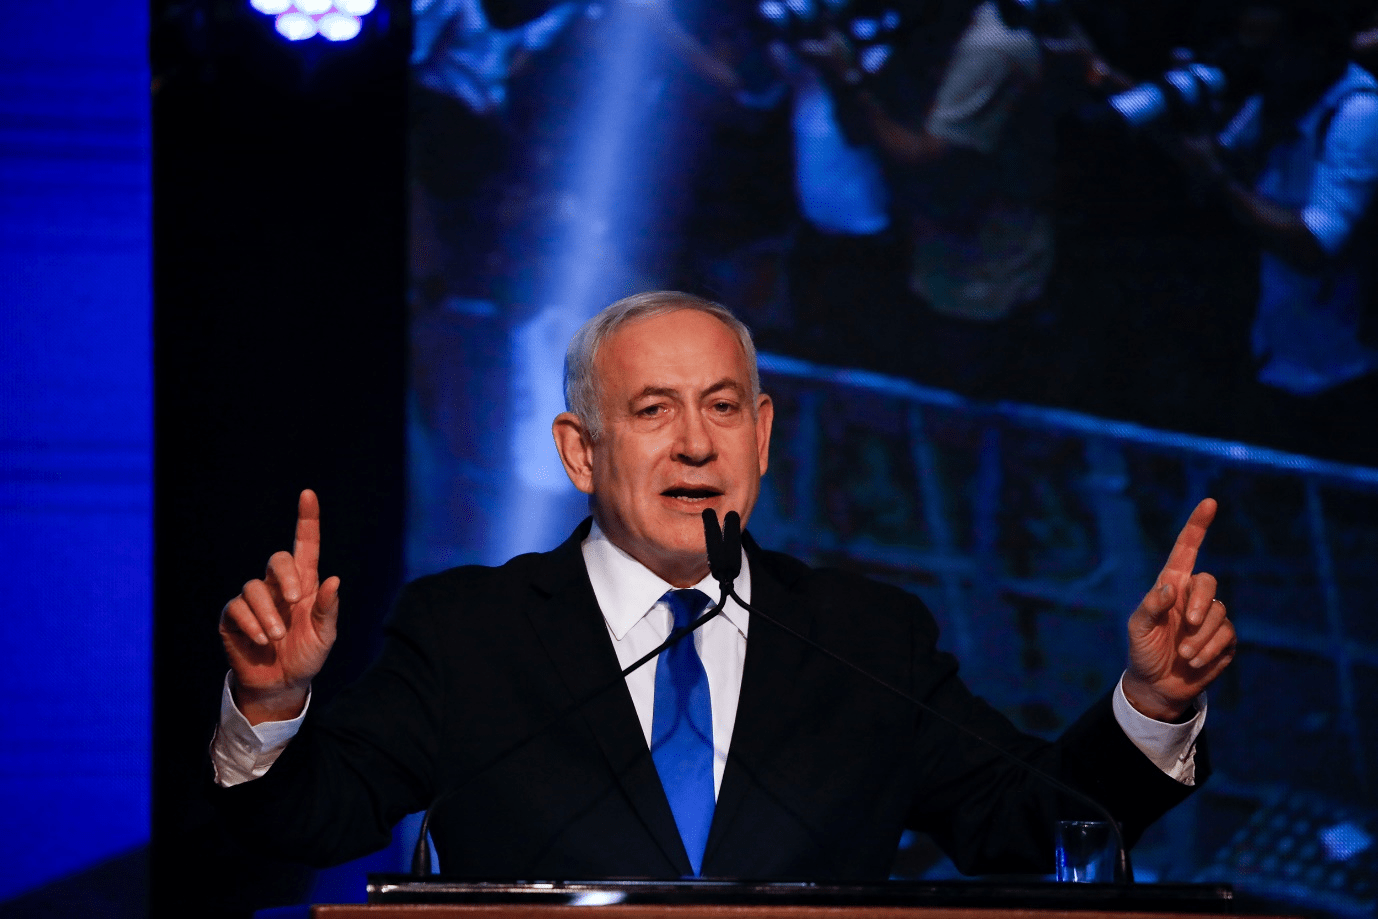 Netanyahu's grip on power in Israel is not that strong